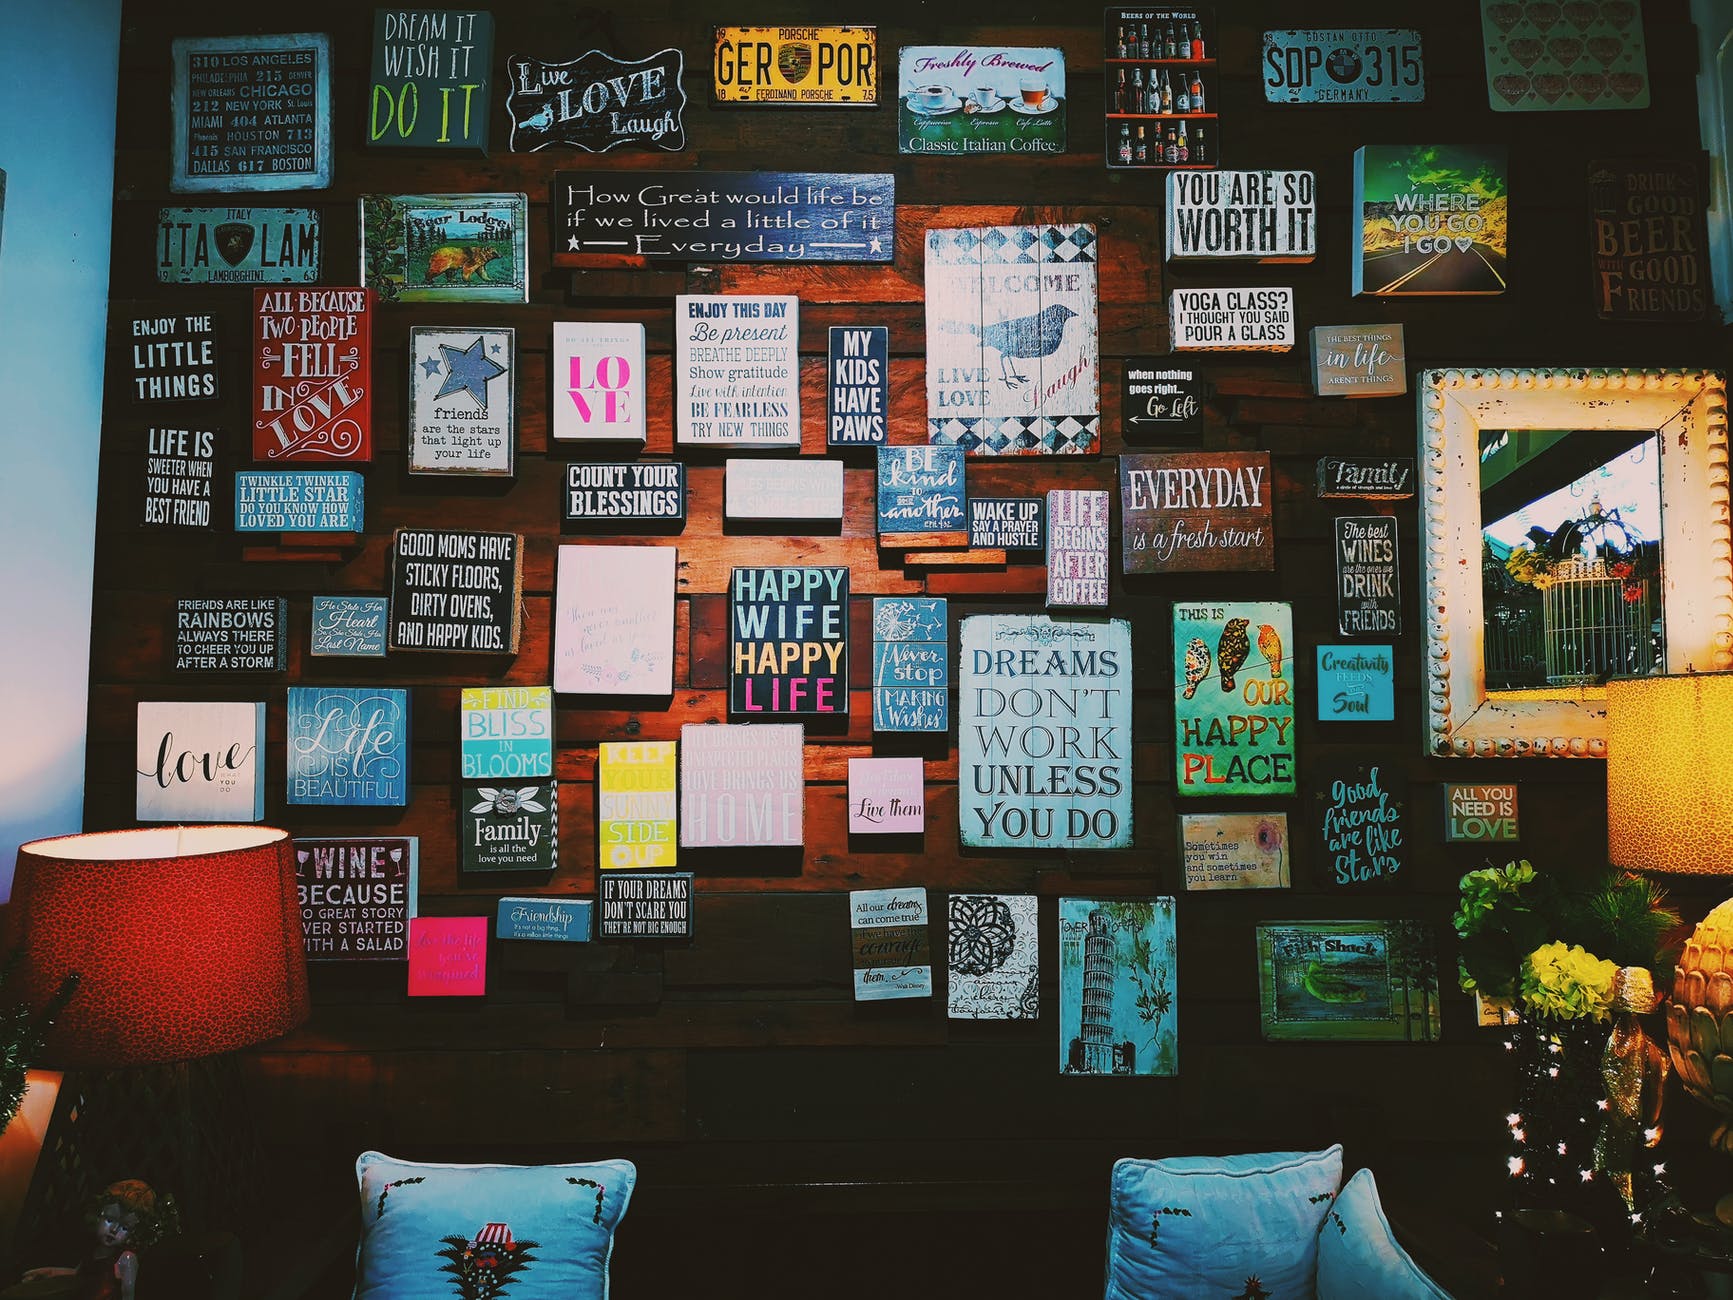 A wall filled with motivational signs